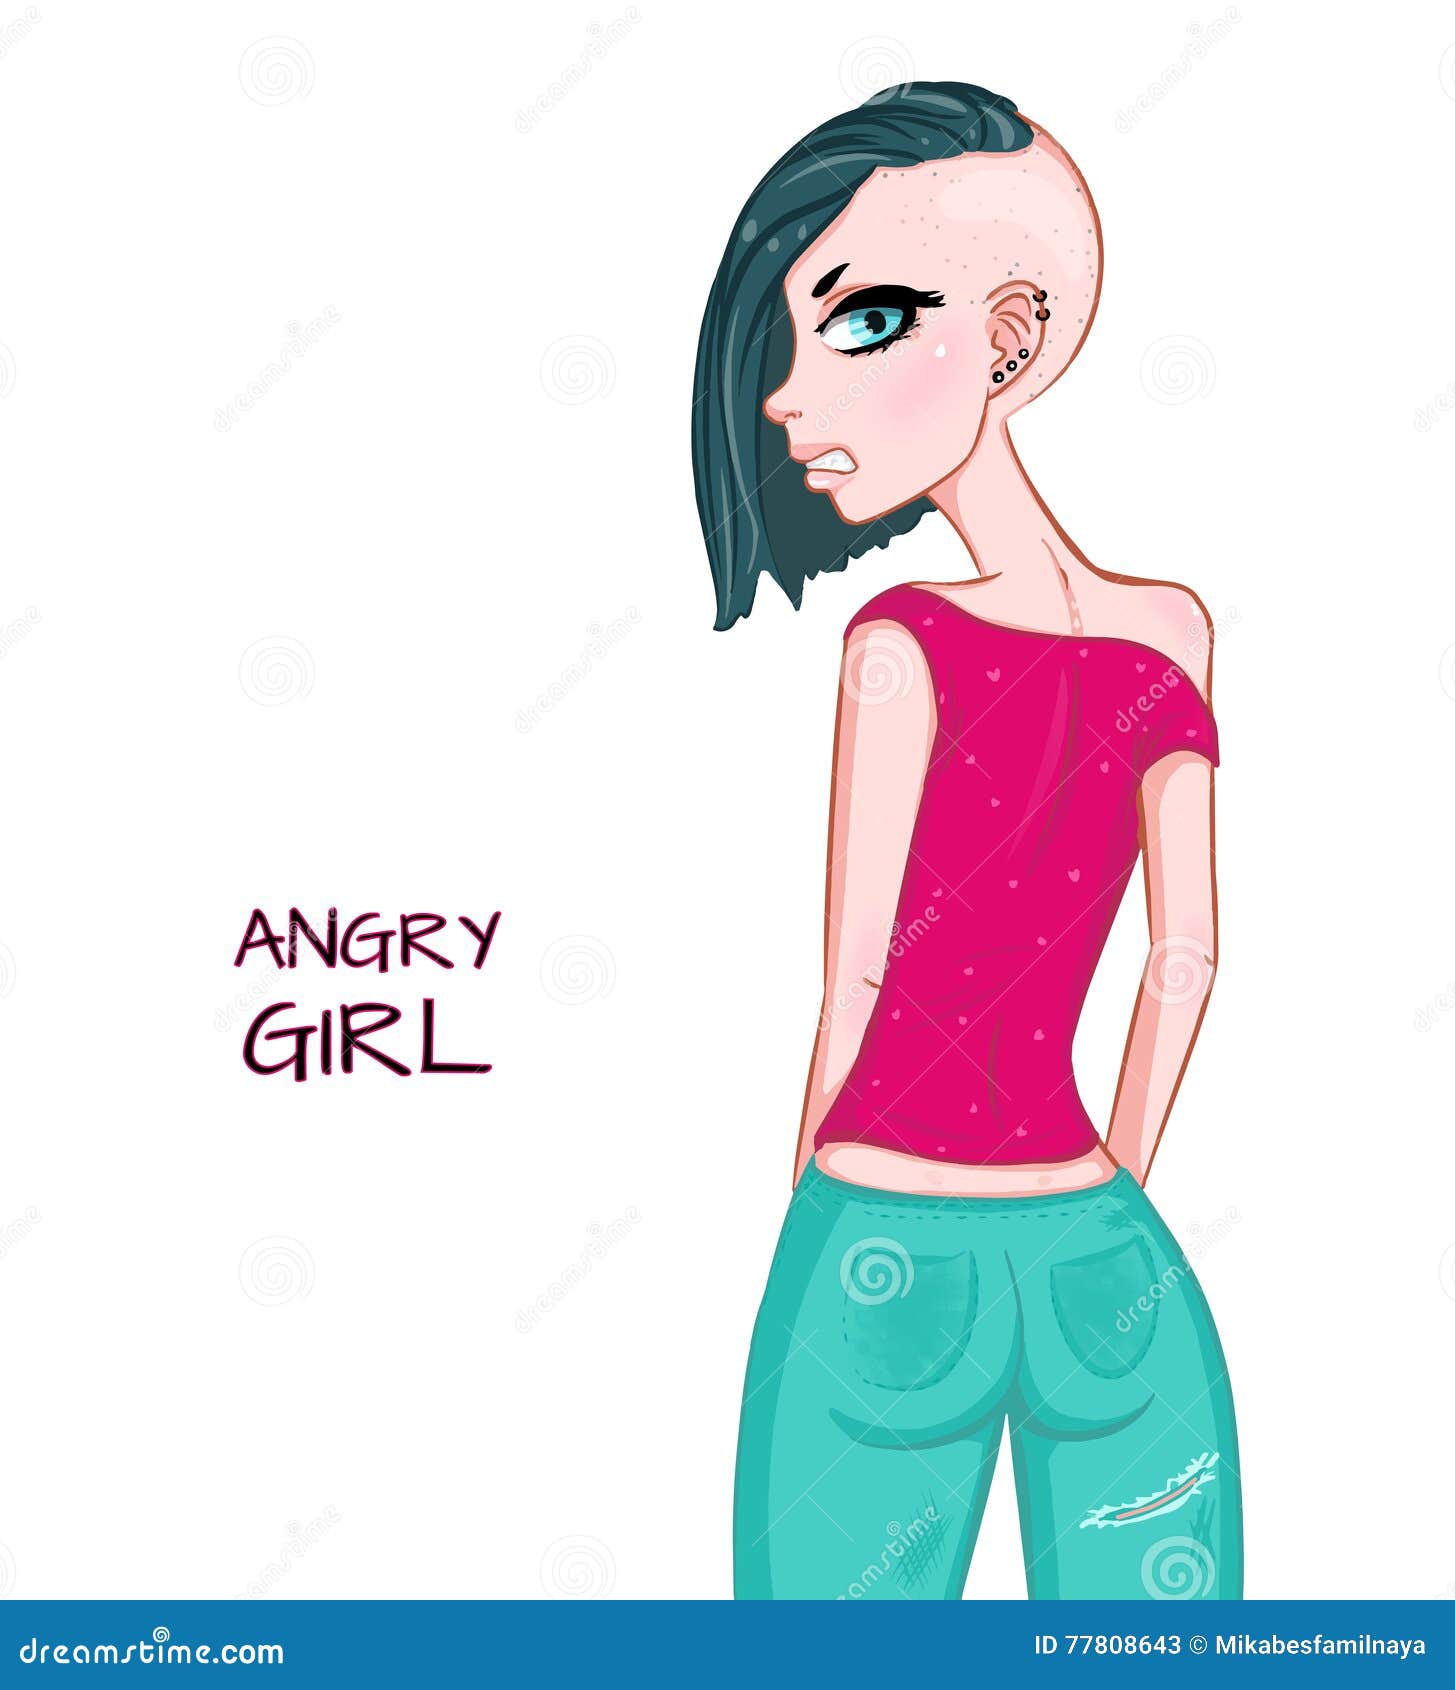 Illustration about Cartoon angry girl in pink shirt. 